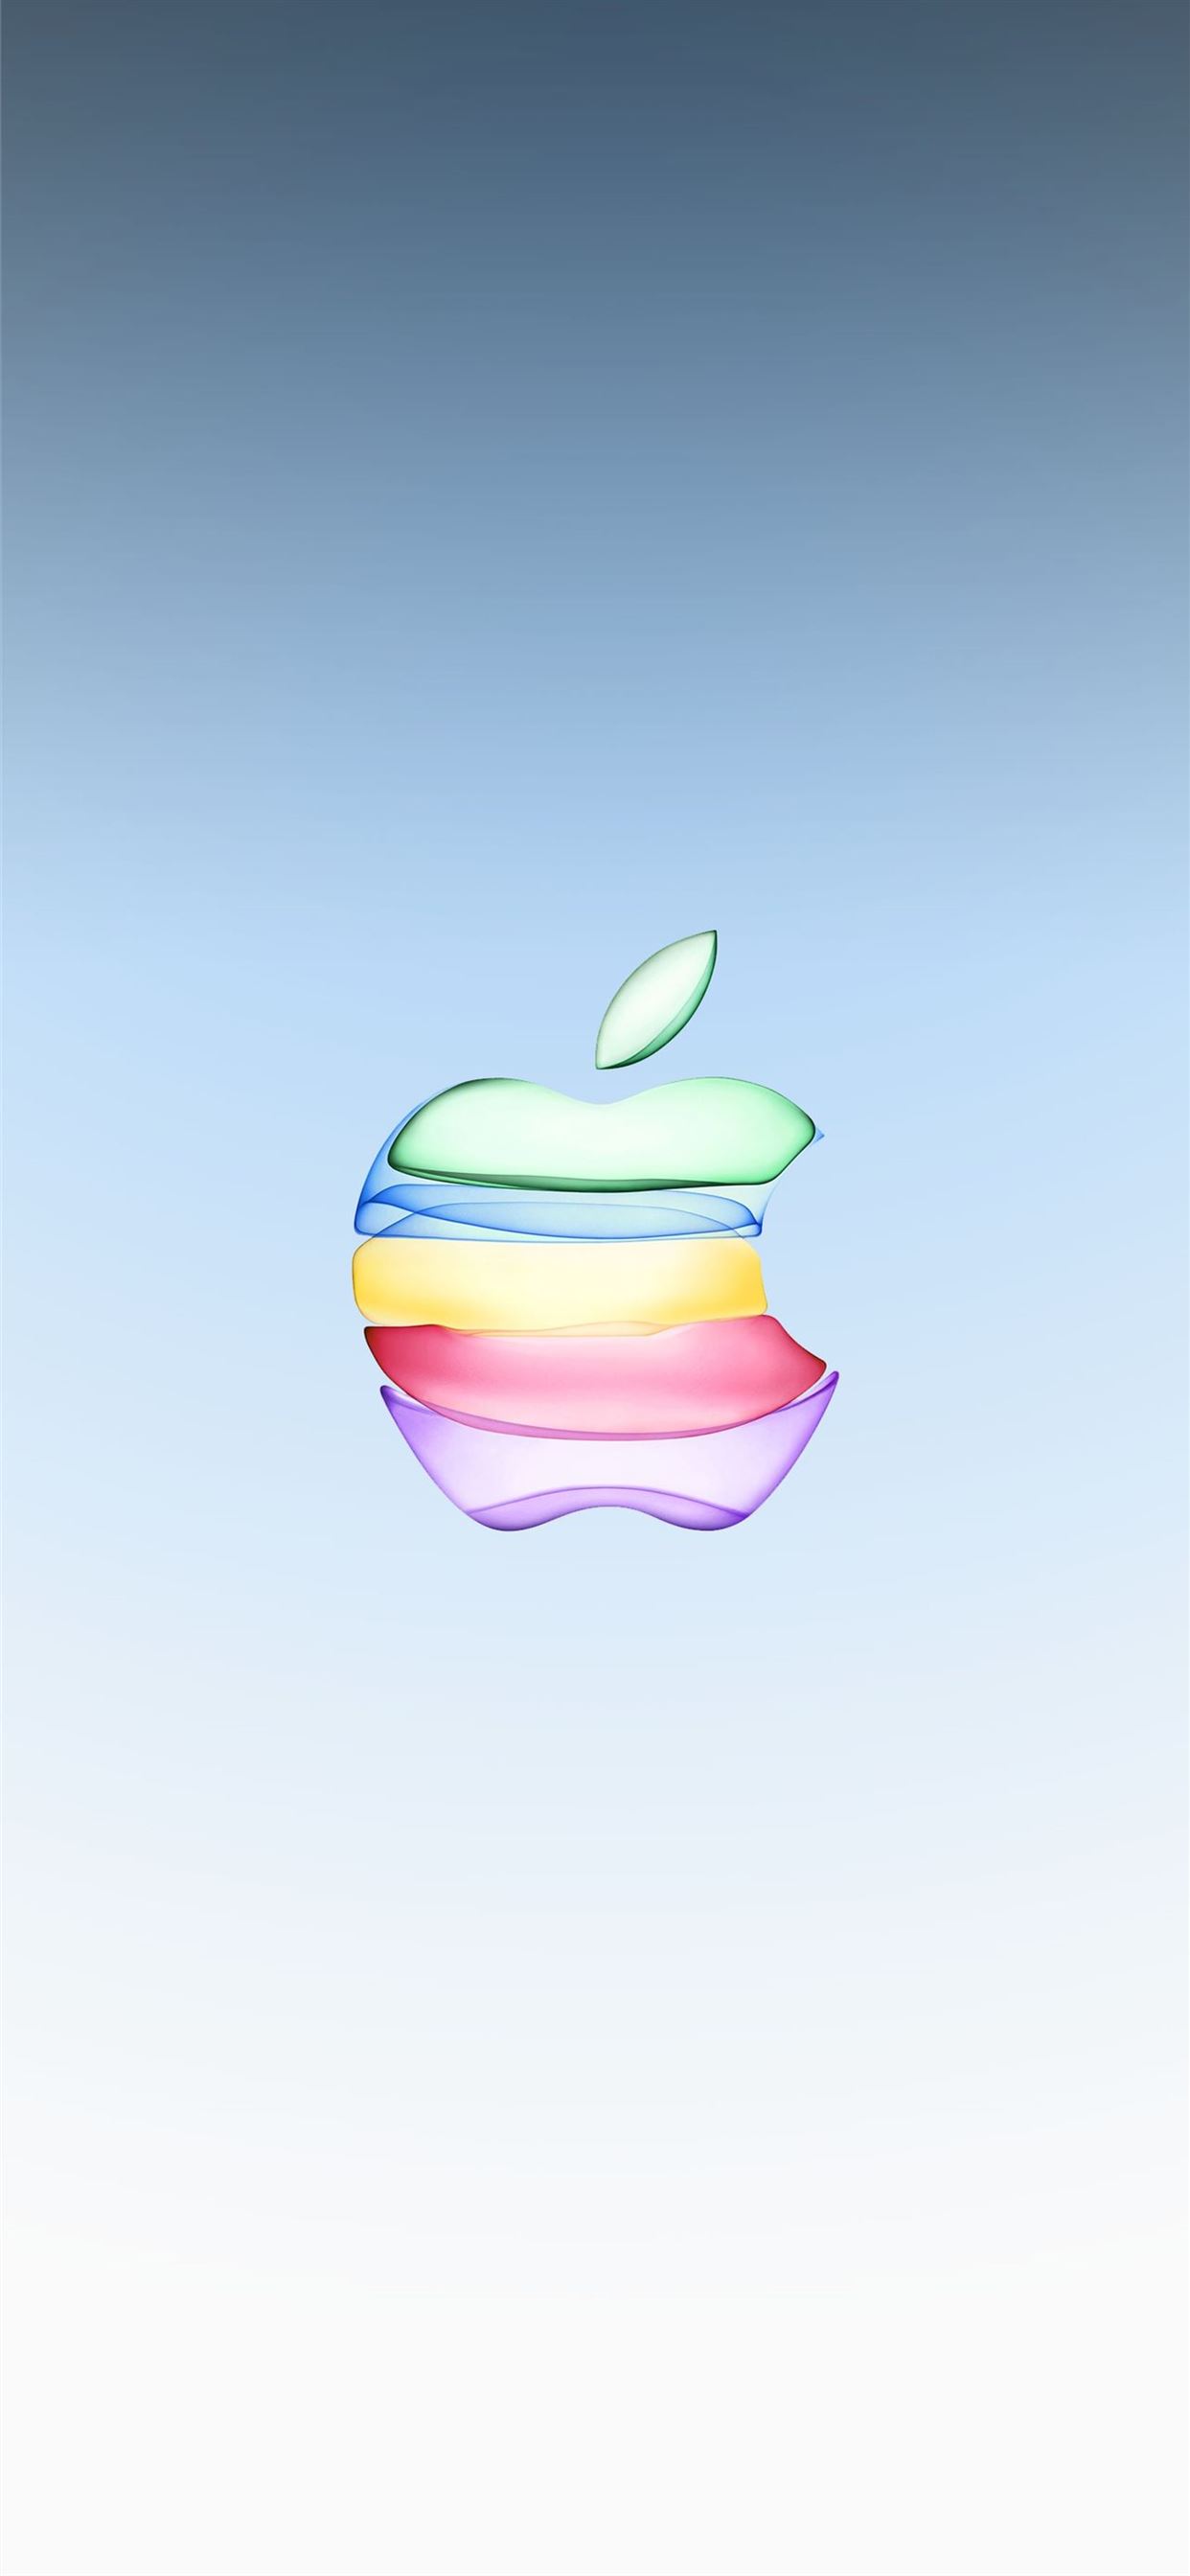 Apple Stock 01 iPhone Wallpapers Free Download